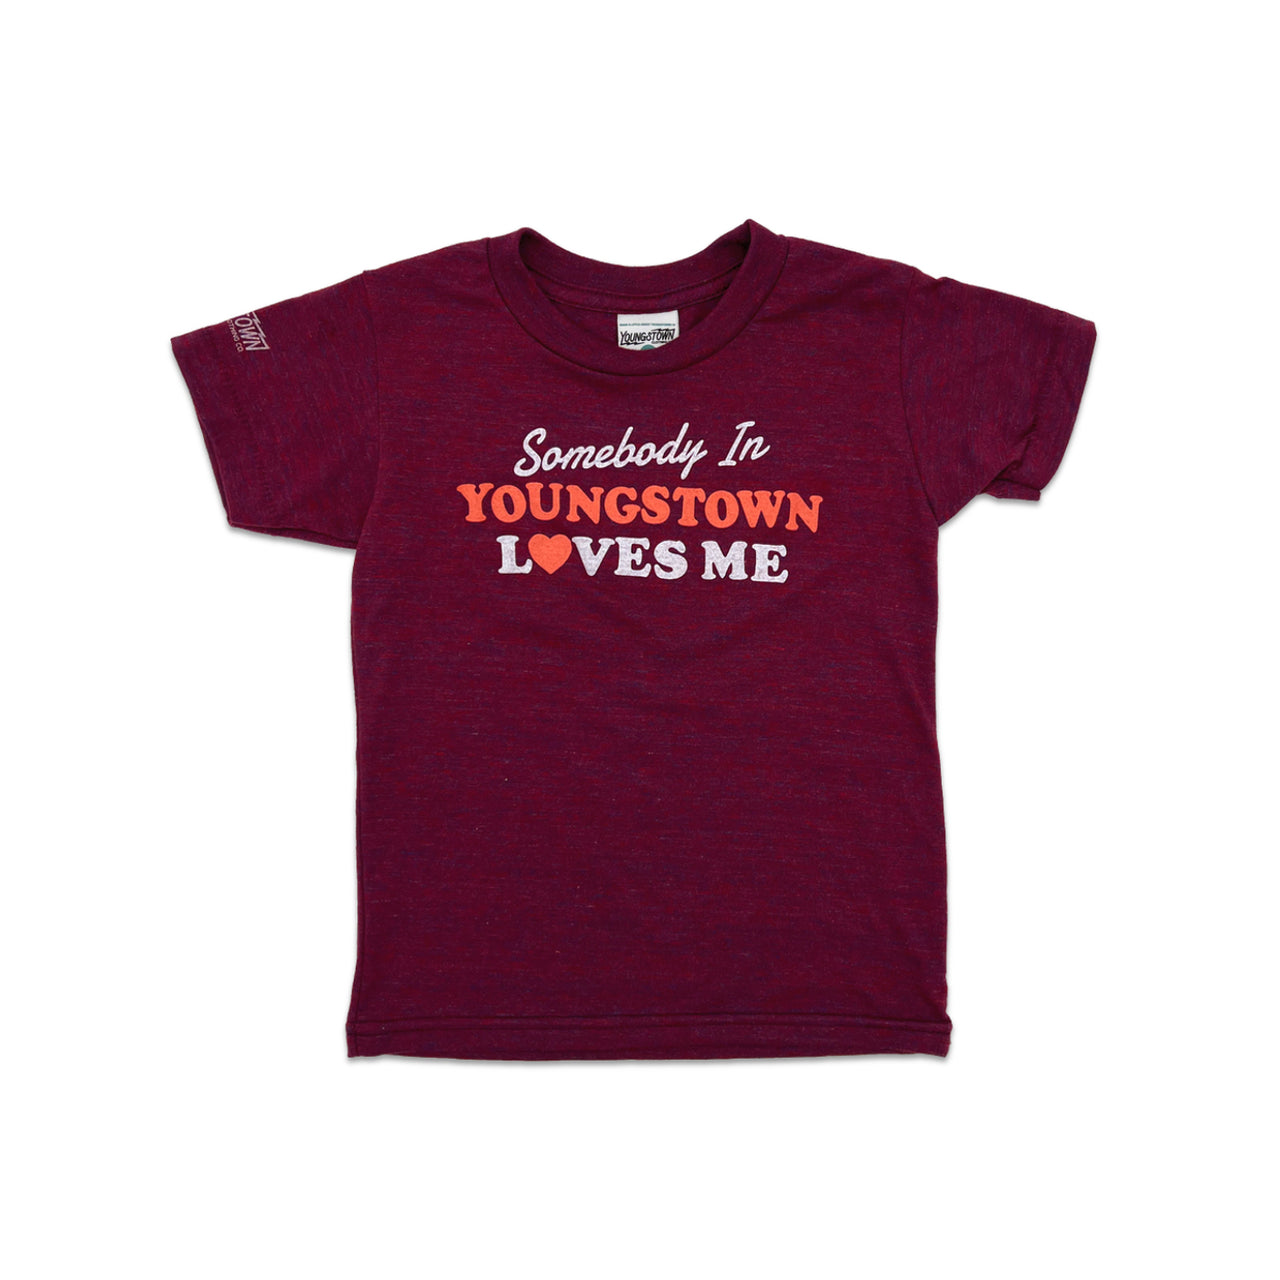 Somebody in Youngstown Loves Me Kids Tee